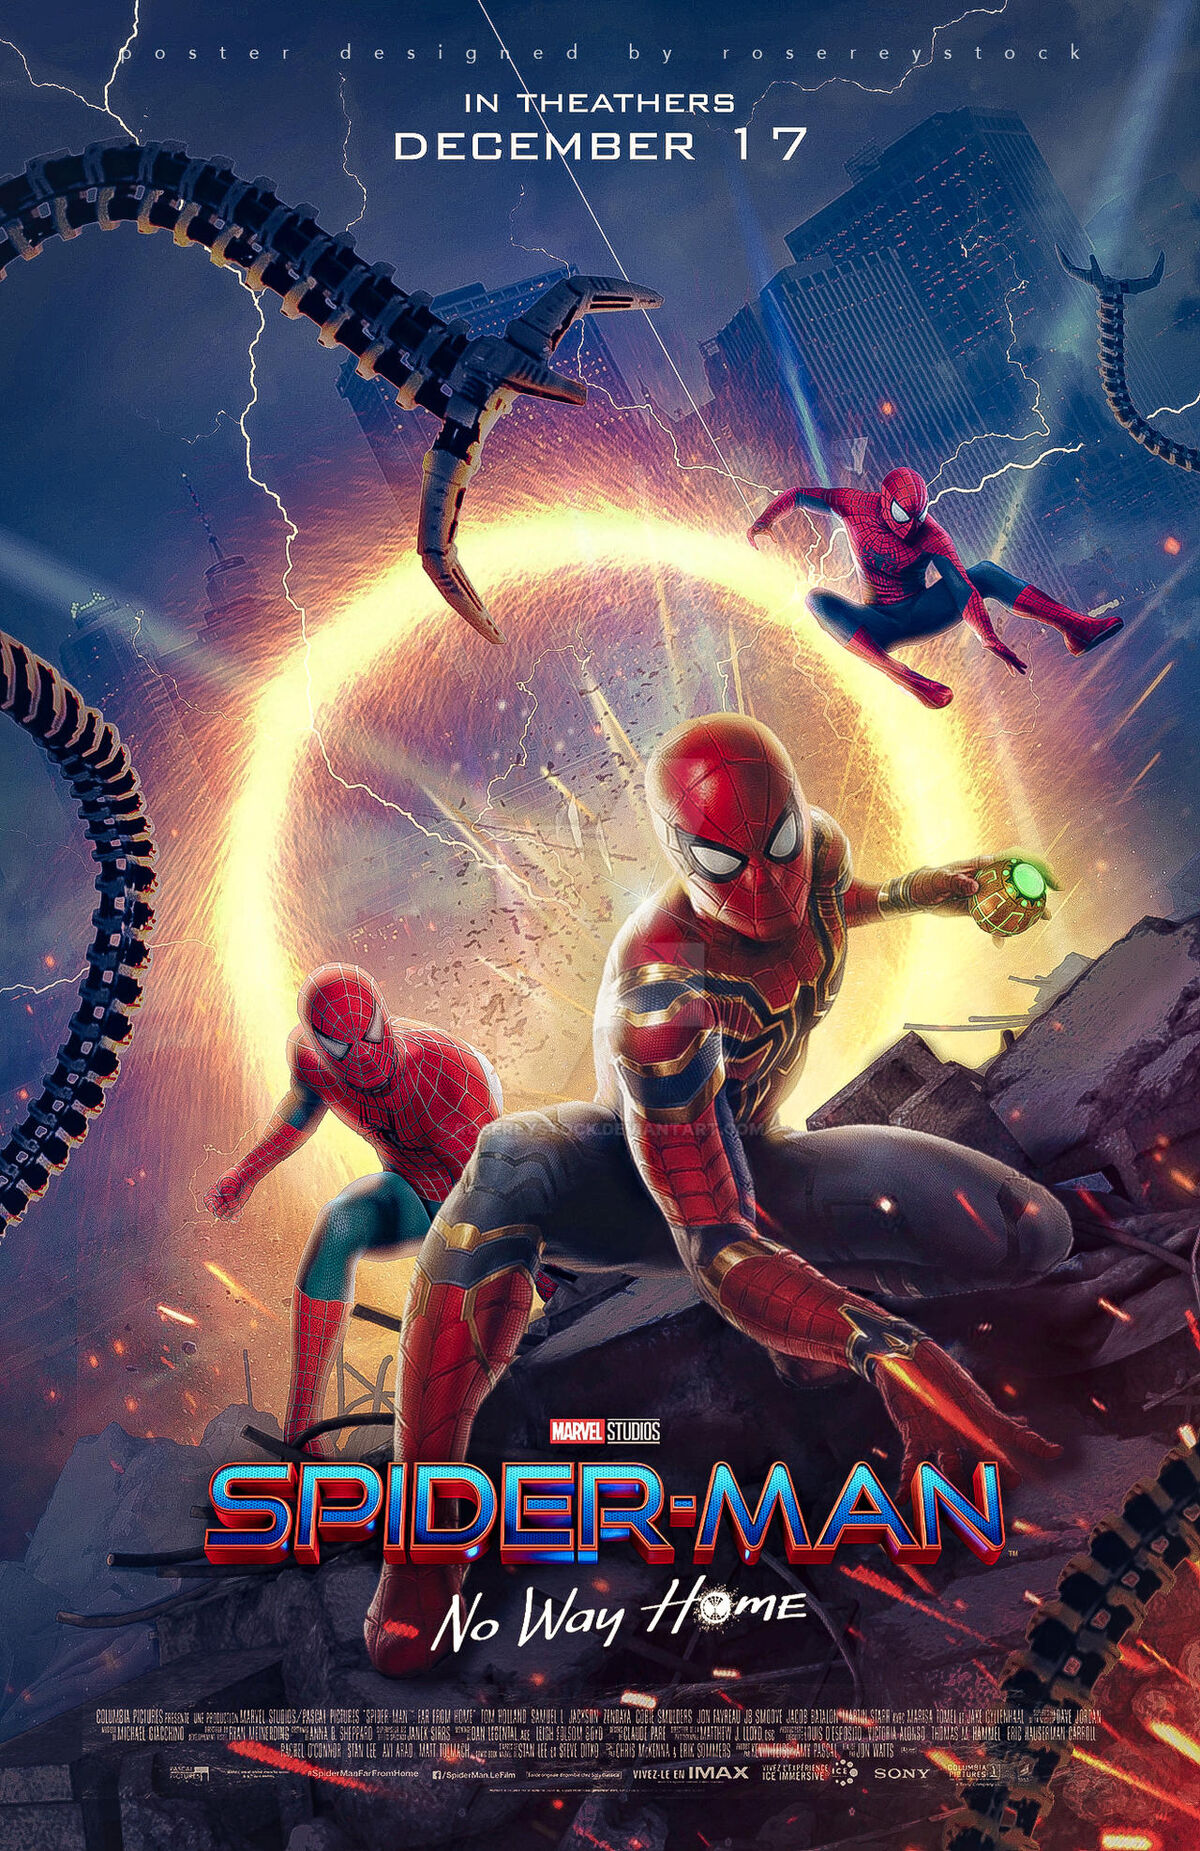 Spider-Man: No Way Home': New Poster Unleashes the Multiverse